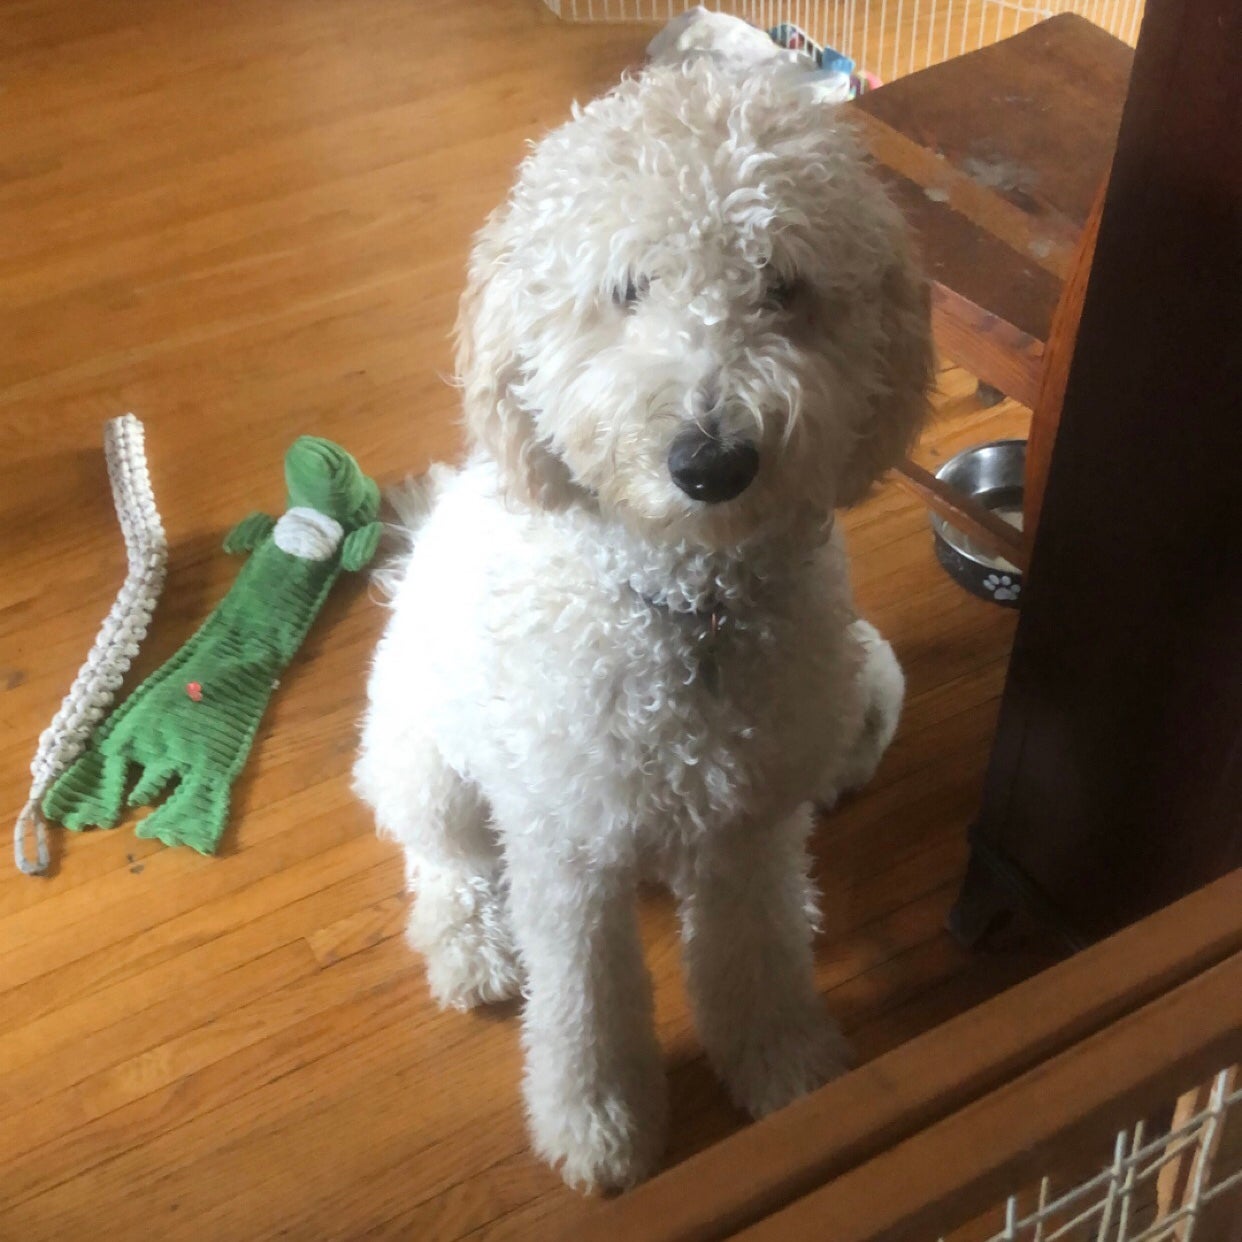 A goldendoodle with curly white fur, sitting and looking at the camera. A few dog toys lie next to her on the floor.